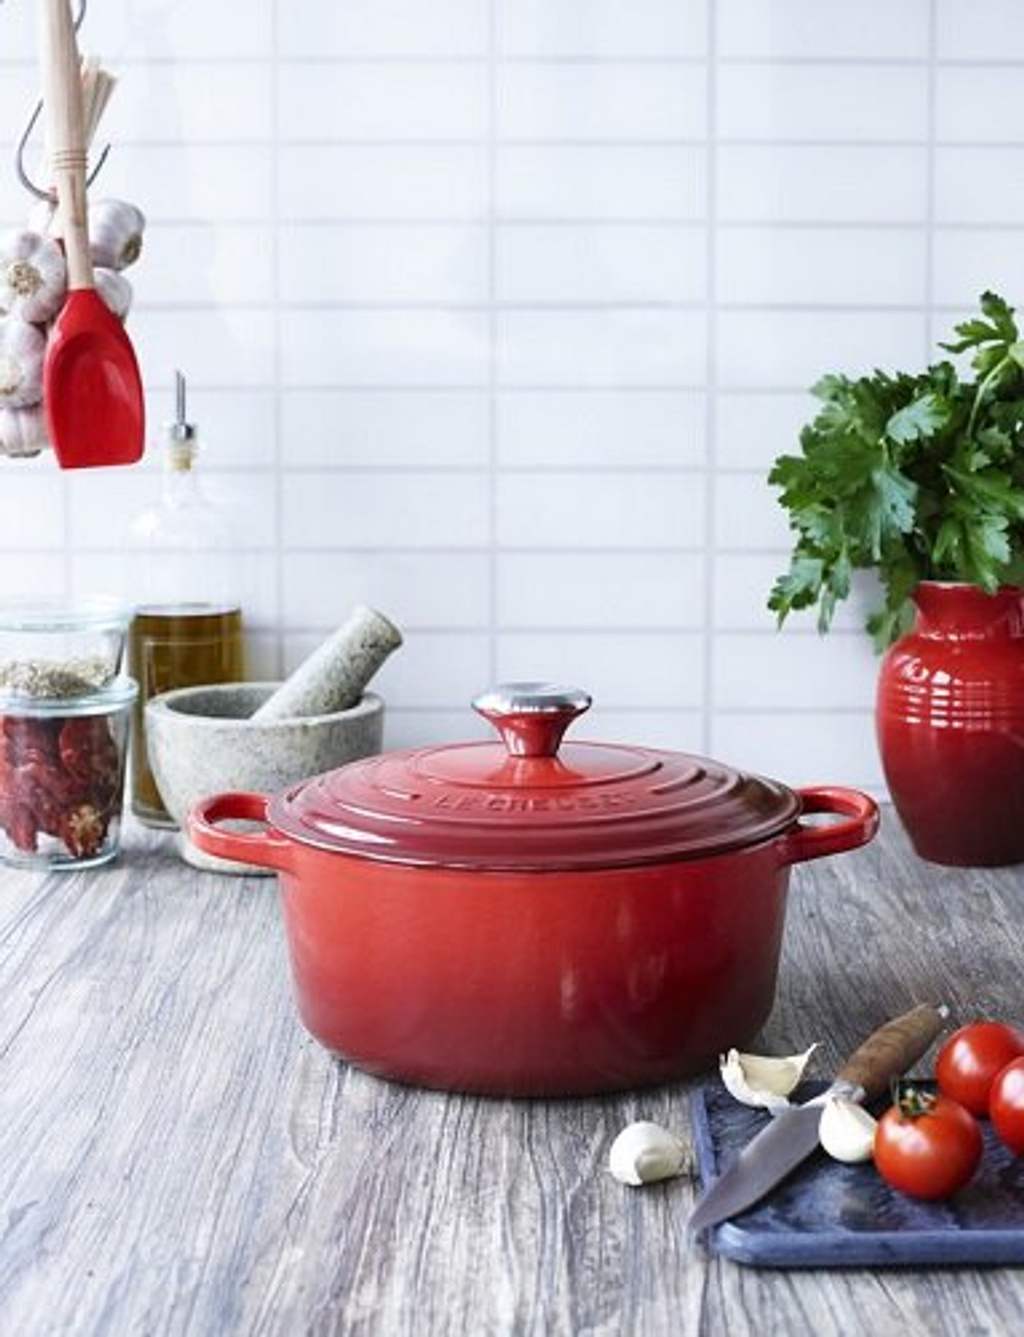  Use the Le Creuset pot from BIYU to make a delicious Belgian stew